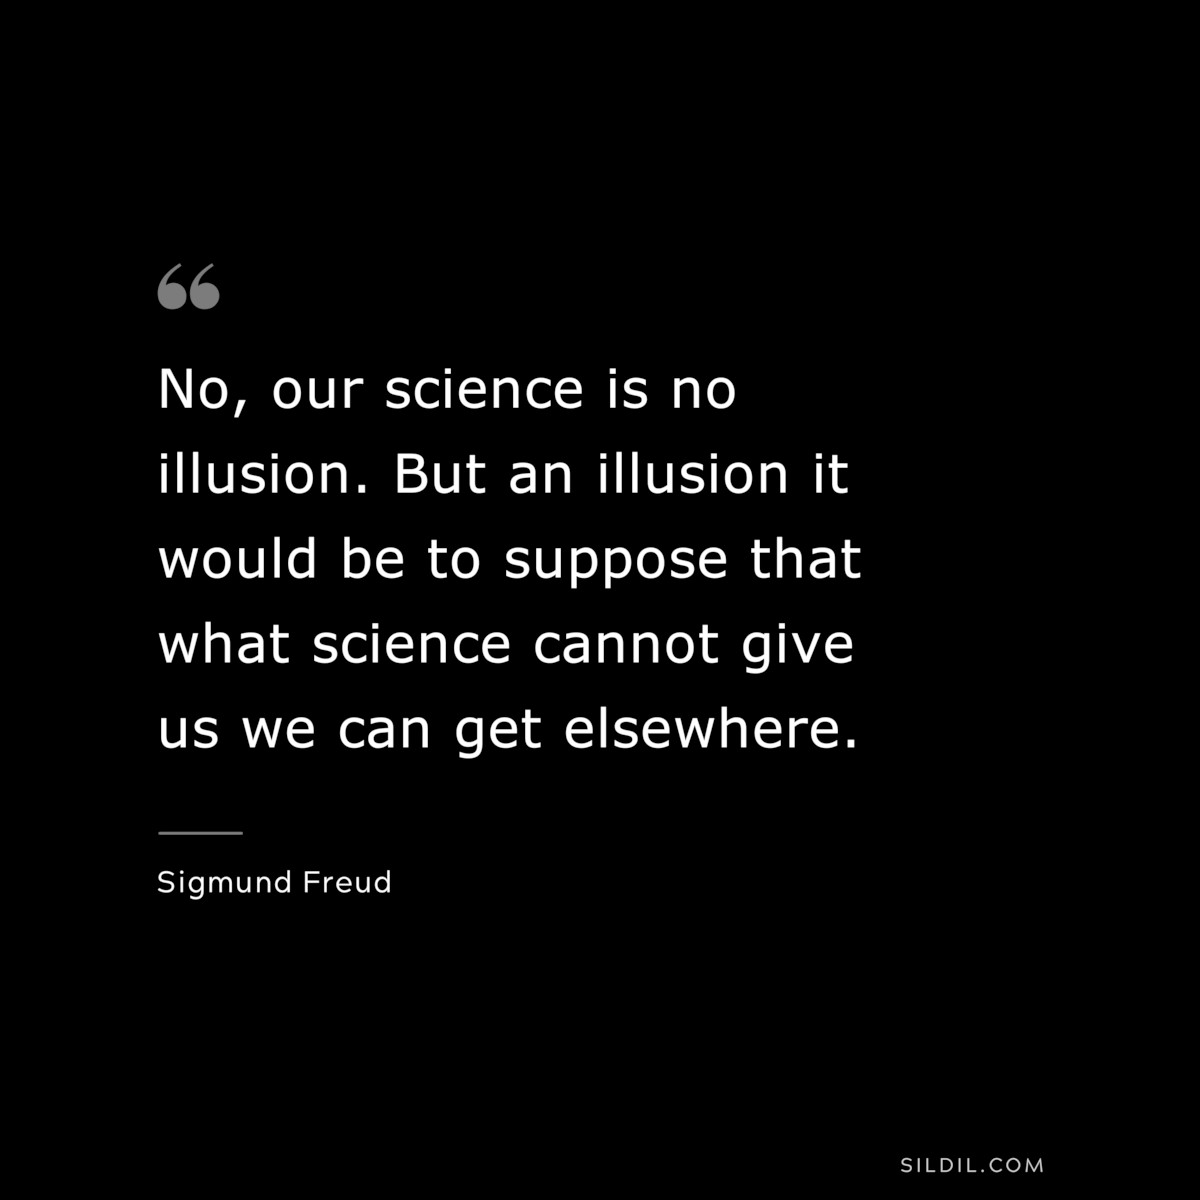 No, our science is no illusion. But an illusion it would be to suppose that what science cannot give us we can get elsewhere. ― Sigmund Frued